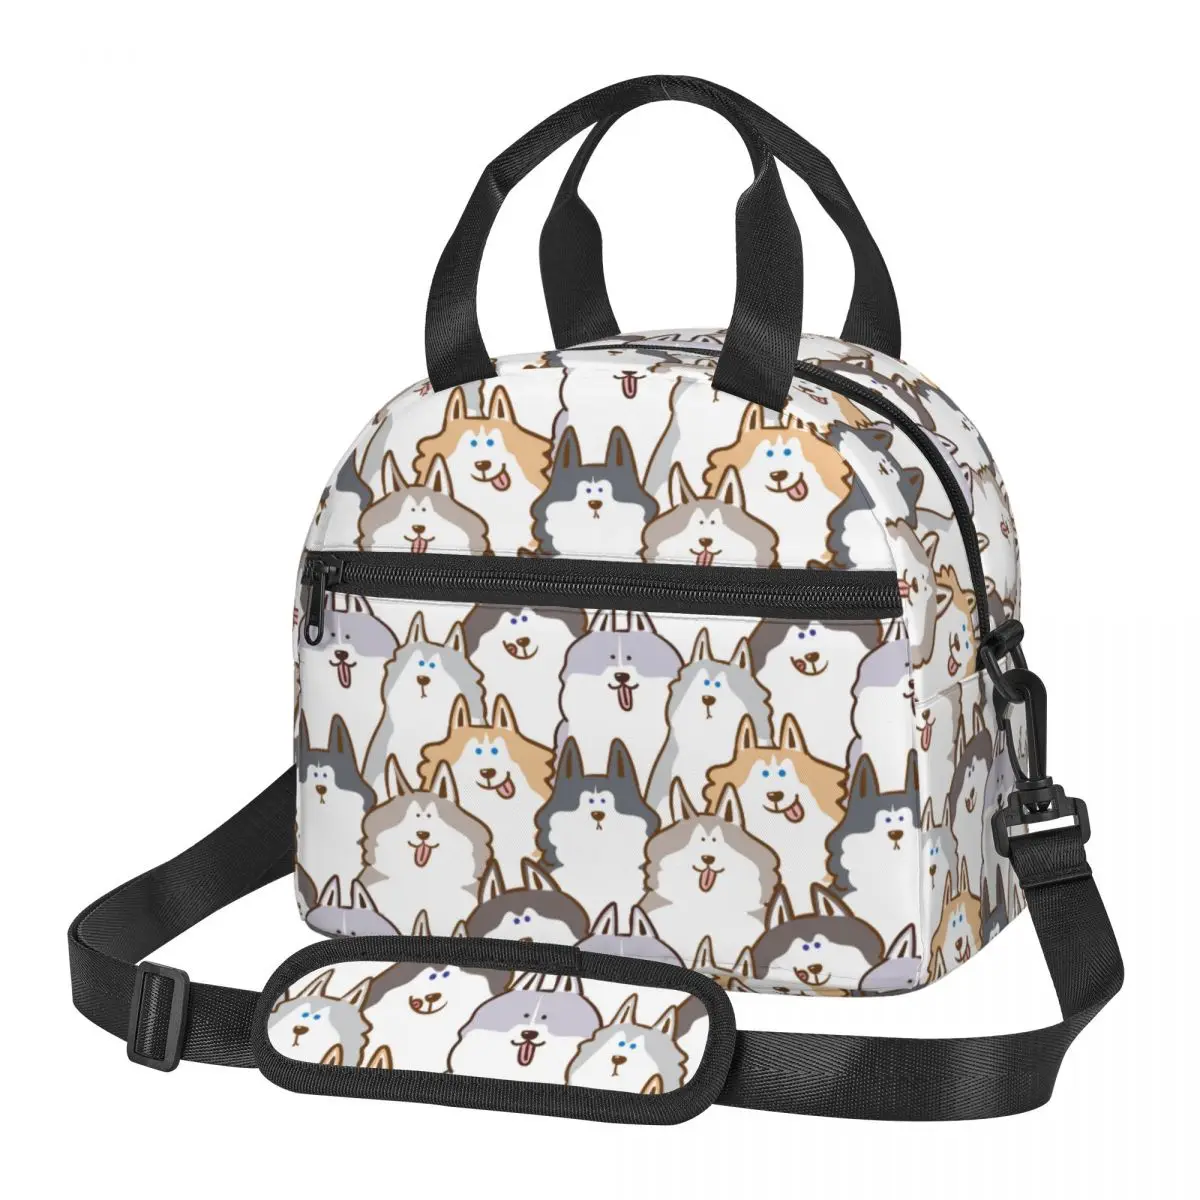 

Cute Cartoon Siberian Husky Dog Product Large Insulated Lunch Bag With Adjustable Shoulder Strap Cooler Thermal Bento Box